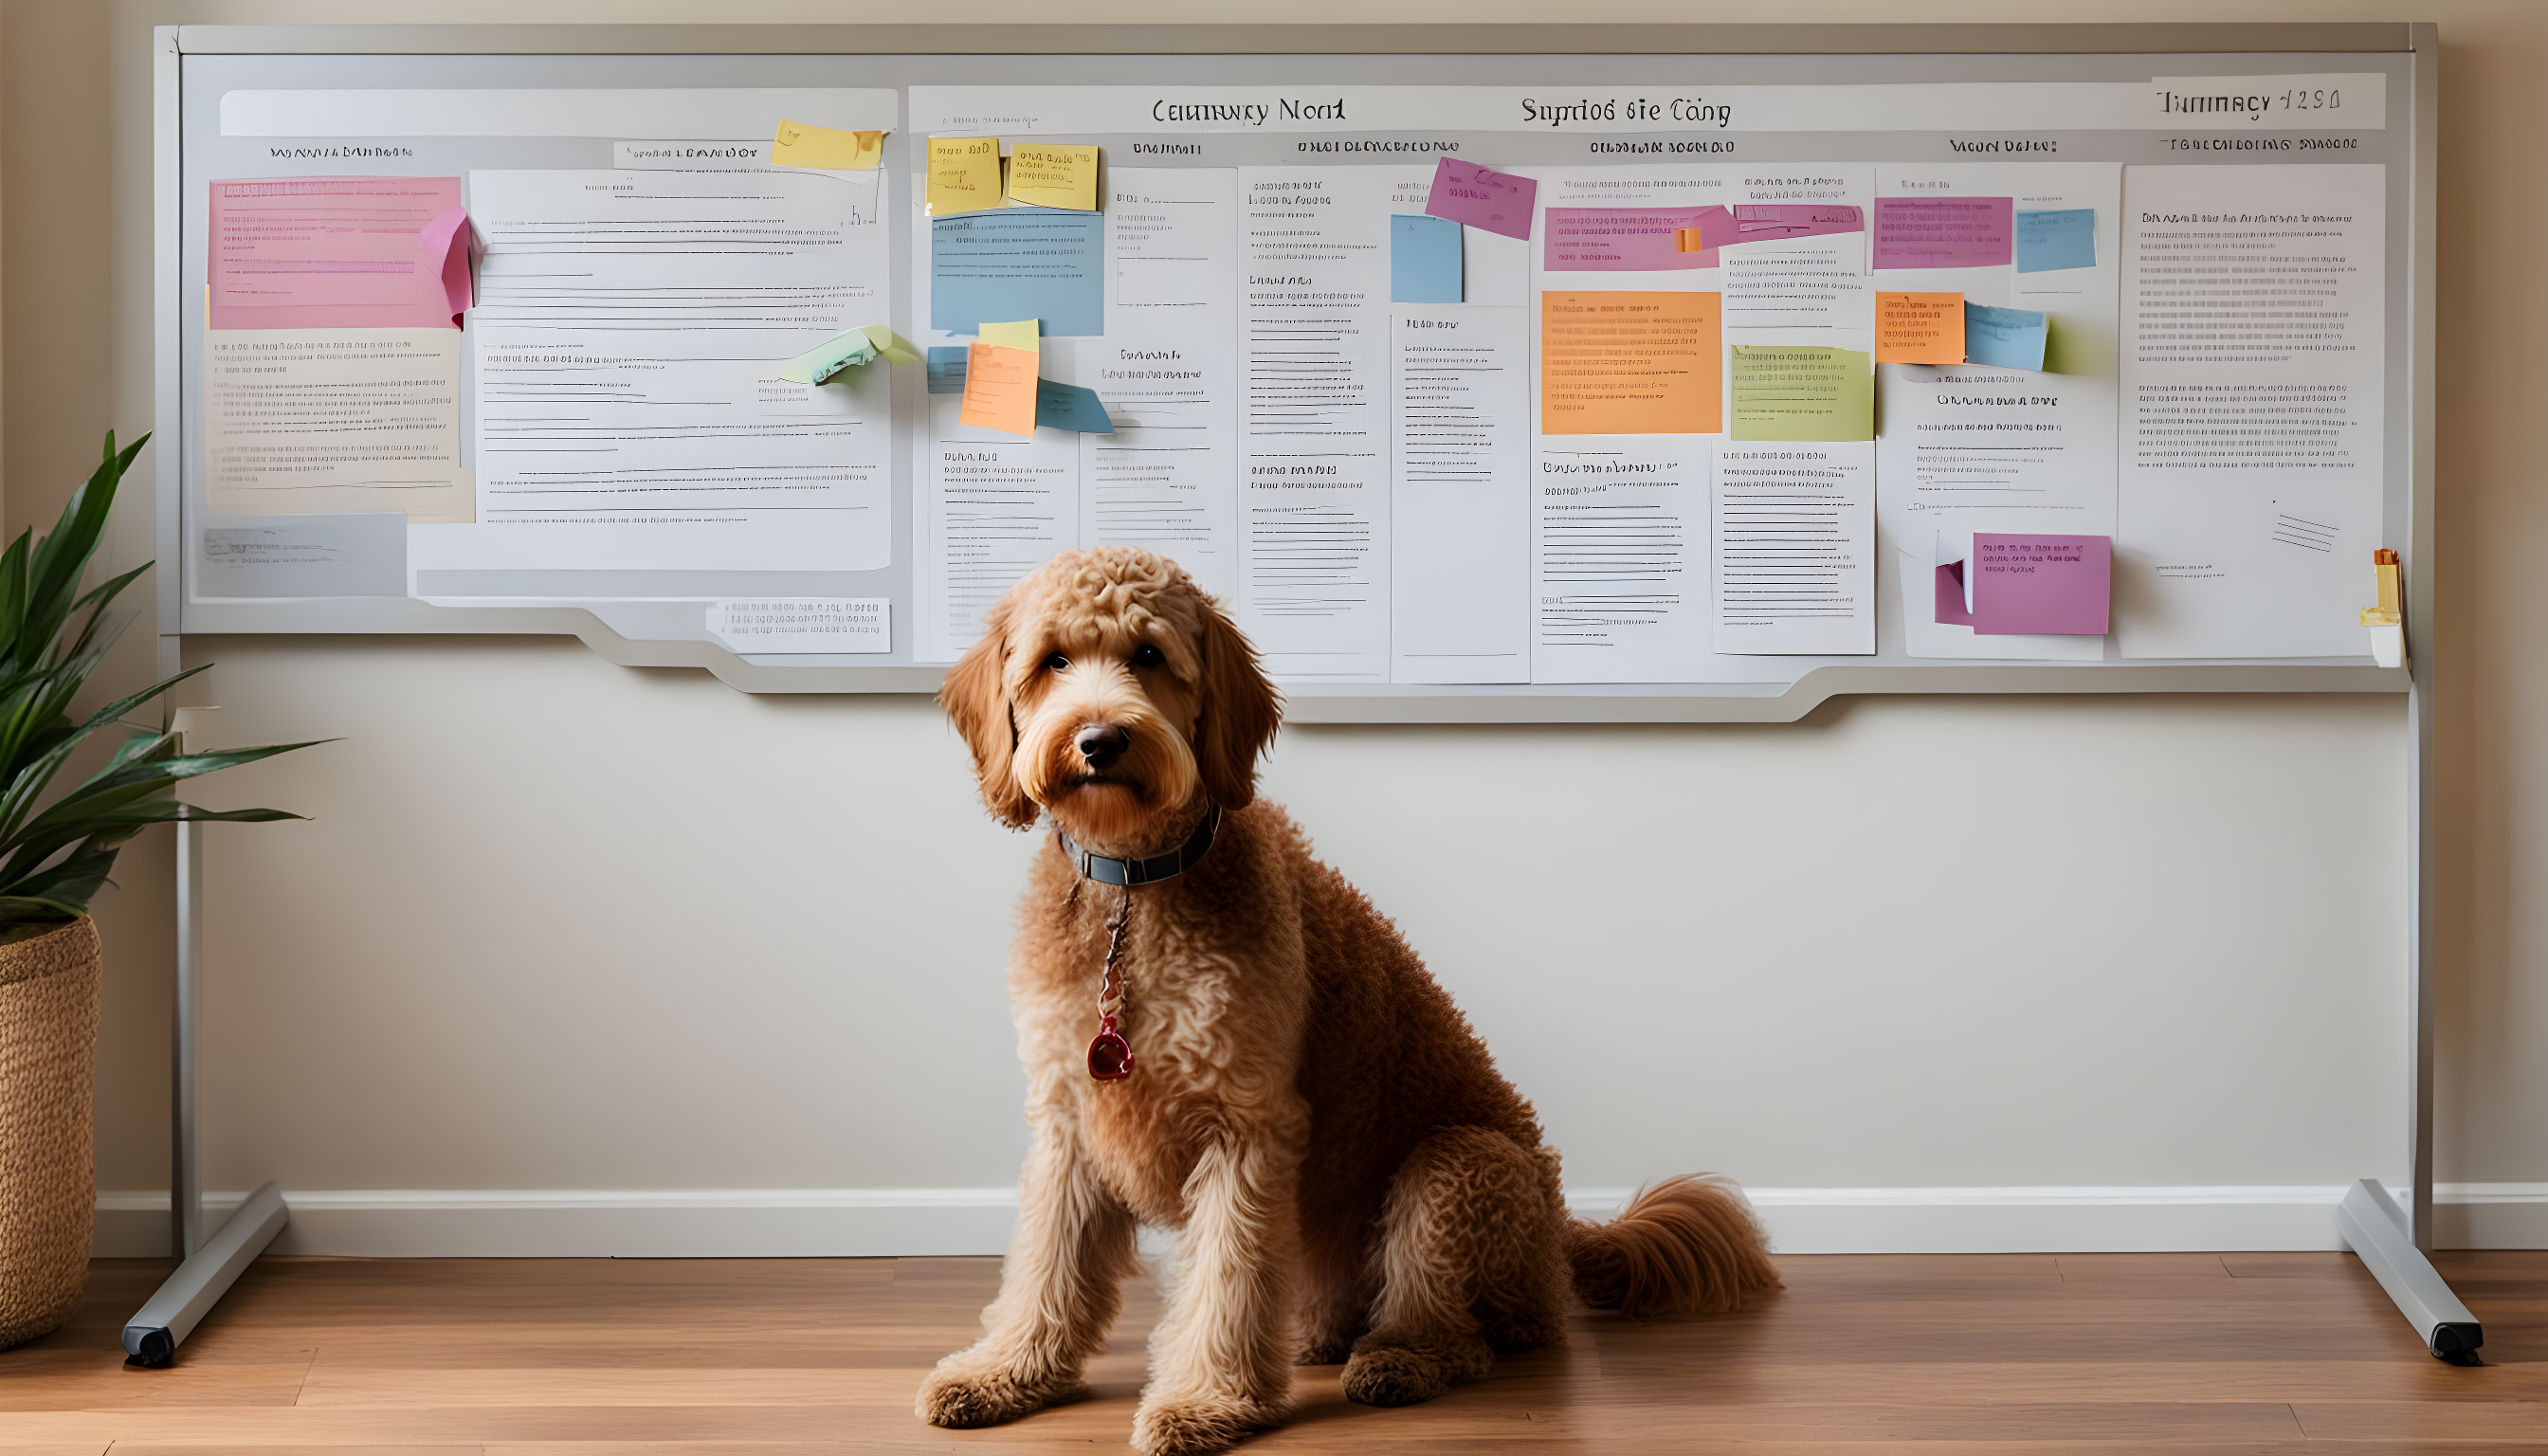 A Labradoodle sitting next to a summary board that highlights the article's key points, offering a quick recap of everything discussed.